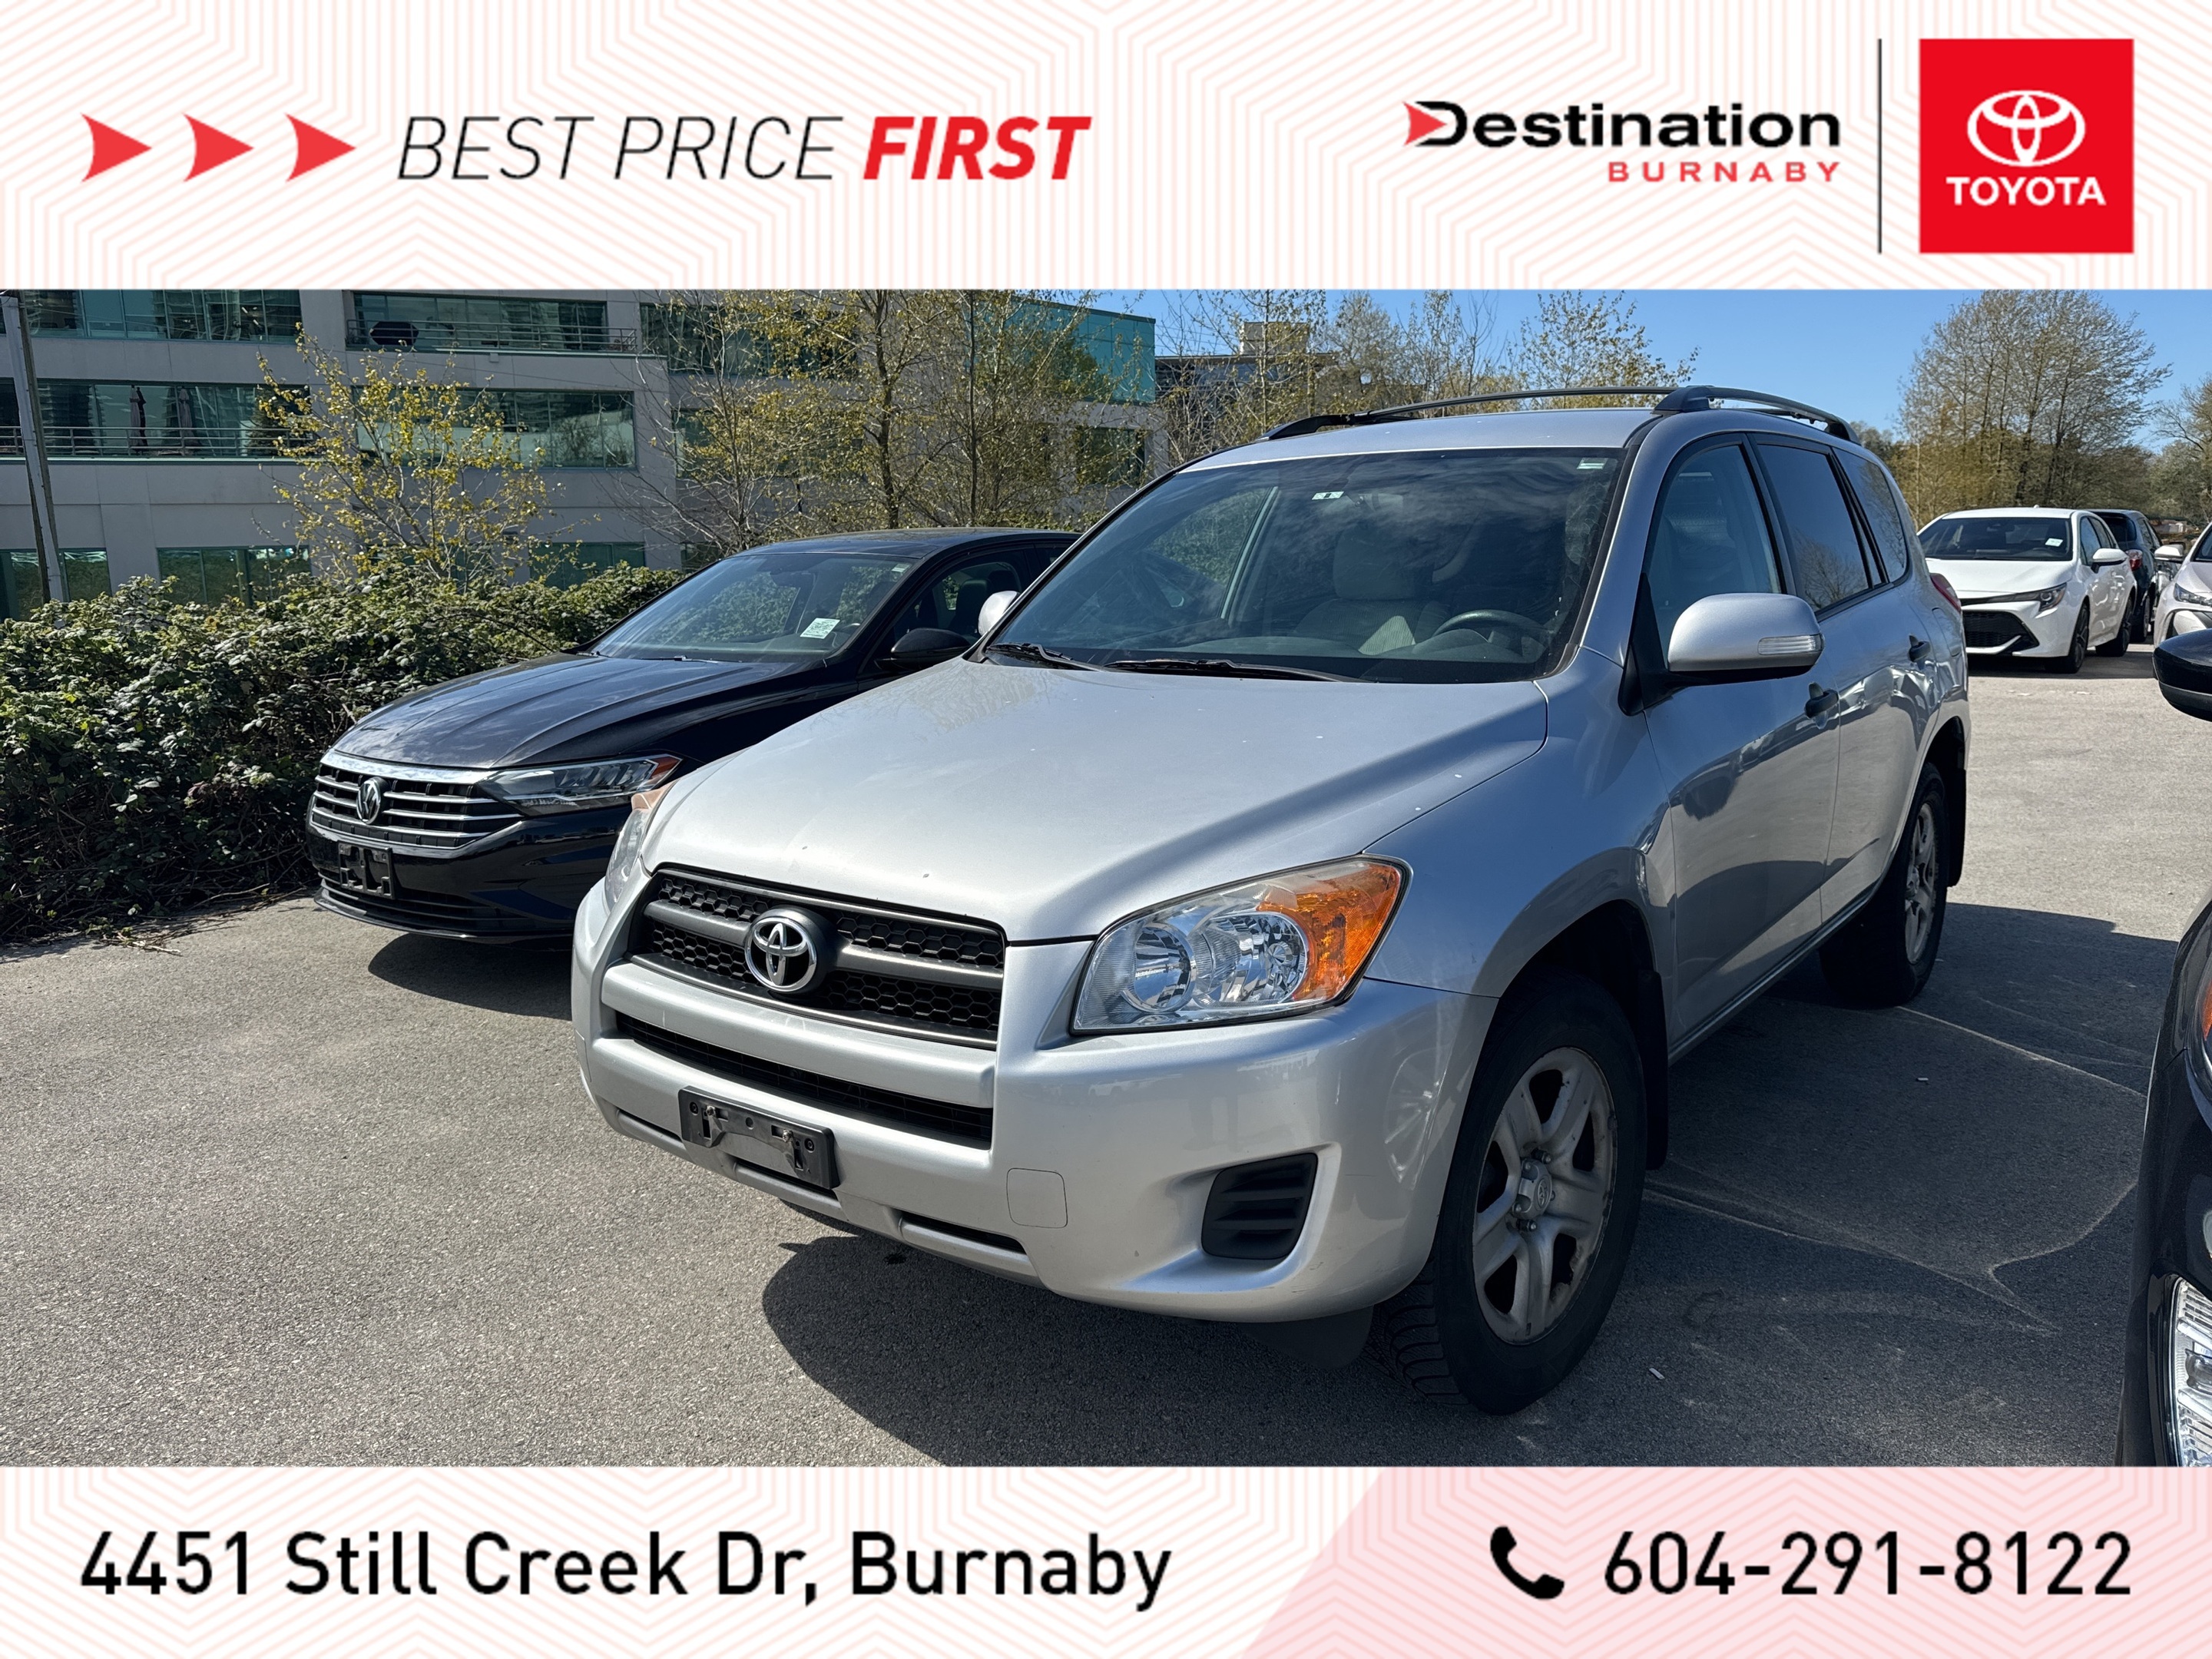 2010 Toyota RAV4 4WD - Local BC vehicle with low KM's for the year!